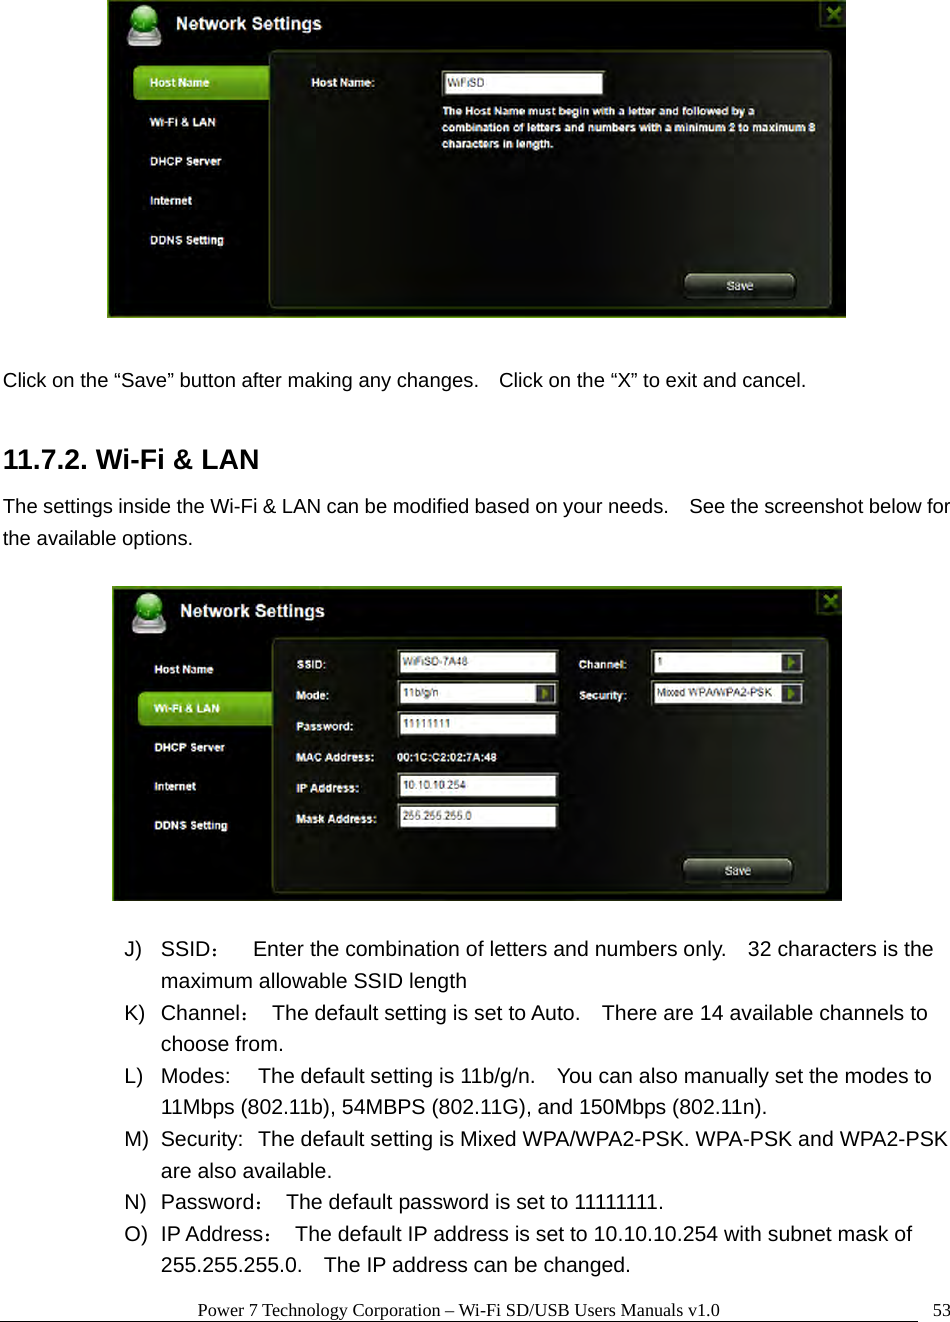 Power 7 Technology Corporation – Wi-Fi SD/USB Users Manuals v1.0  53  Click on the “Save” button after making any changes.    Click on the “X” to exit and cancel.  11.7.2. Wi-Fi &amp; LAN The settings inside the Wi-Fi &amp; LAN can be modified based on your needs.    See the screenshot below for the available options.    J) SSID：    Enter the combination of letters and numbers only.    32 characters is the maximum allowable SSID length   K) Channel：  The default setting is set to Auto.    There are 14 available channels to choose from. L)  Modes:  The default setting is 11b/g/n.    You can also manually set the modes to 11Mbps (802.11b), 54MBPS (802.11G), and 150Mbps (802.11n). M)  Security:  The default setting is Mixed WPA/WPA2-PSK. WPA-PSK and WPA2-PSK are also available. N) Password：  The default password is set to 11111111. O) IP Address：  The default IP address is set to 10.10.10.254 with subnet mask of 255.255.255.0.    The IP address can be changed. 